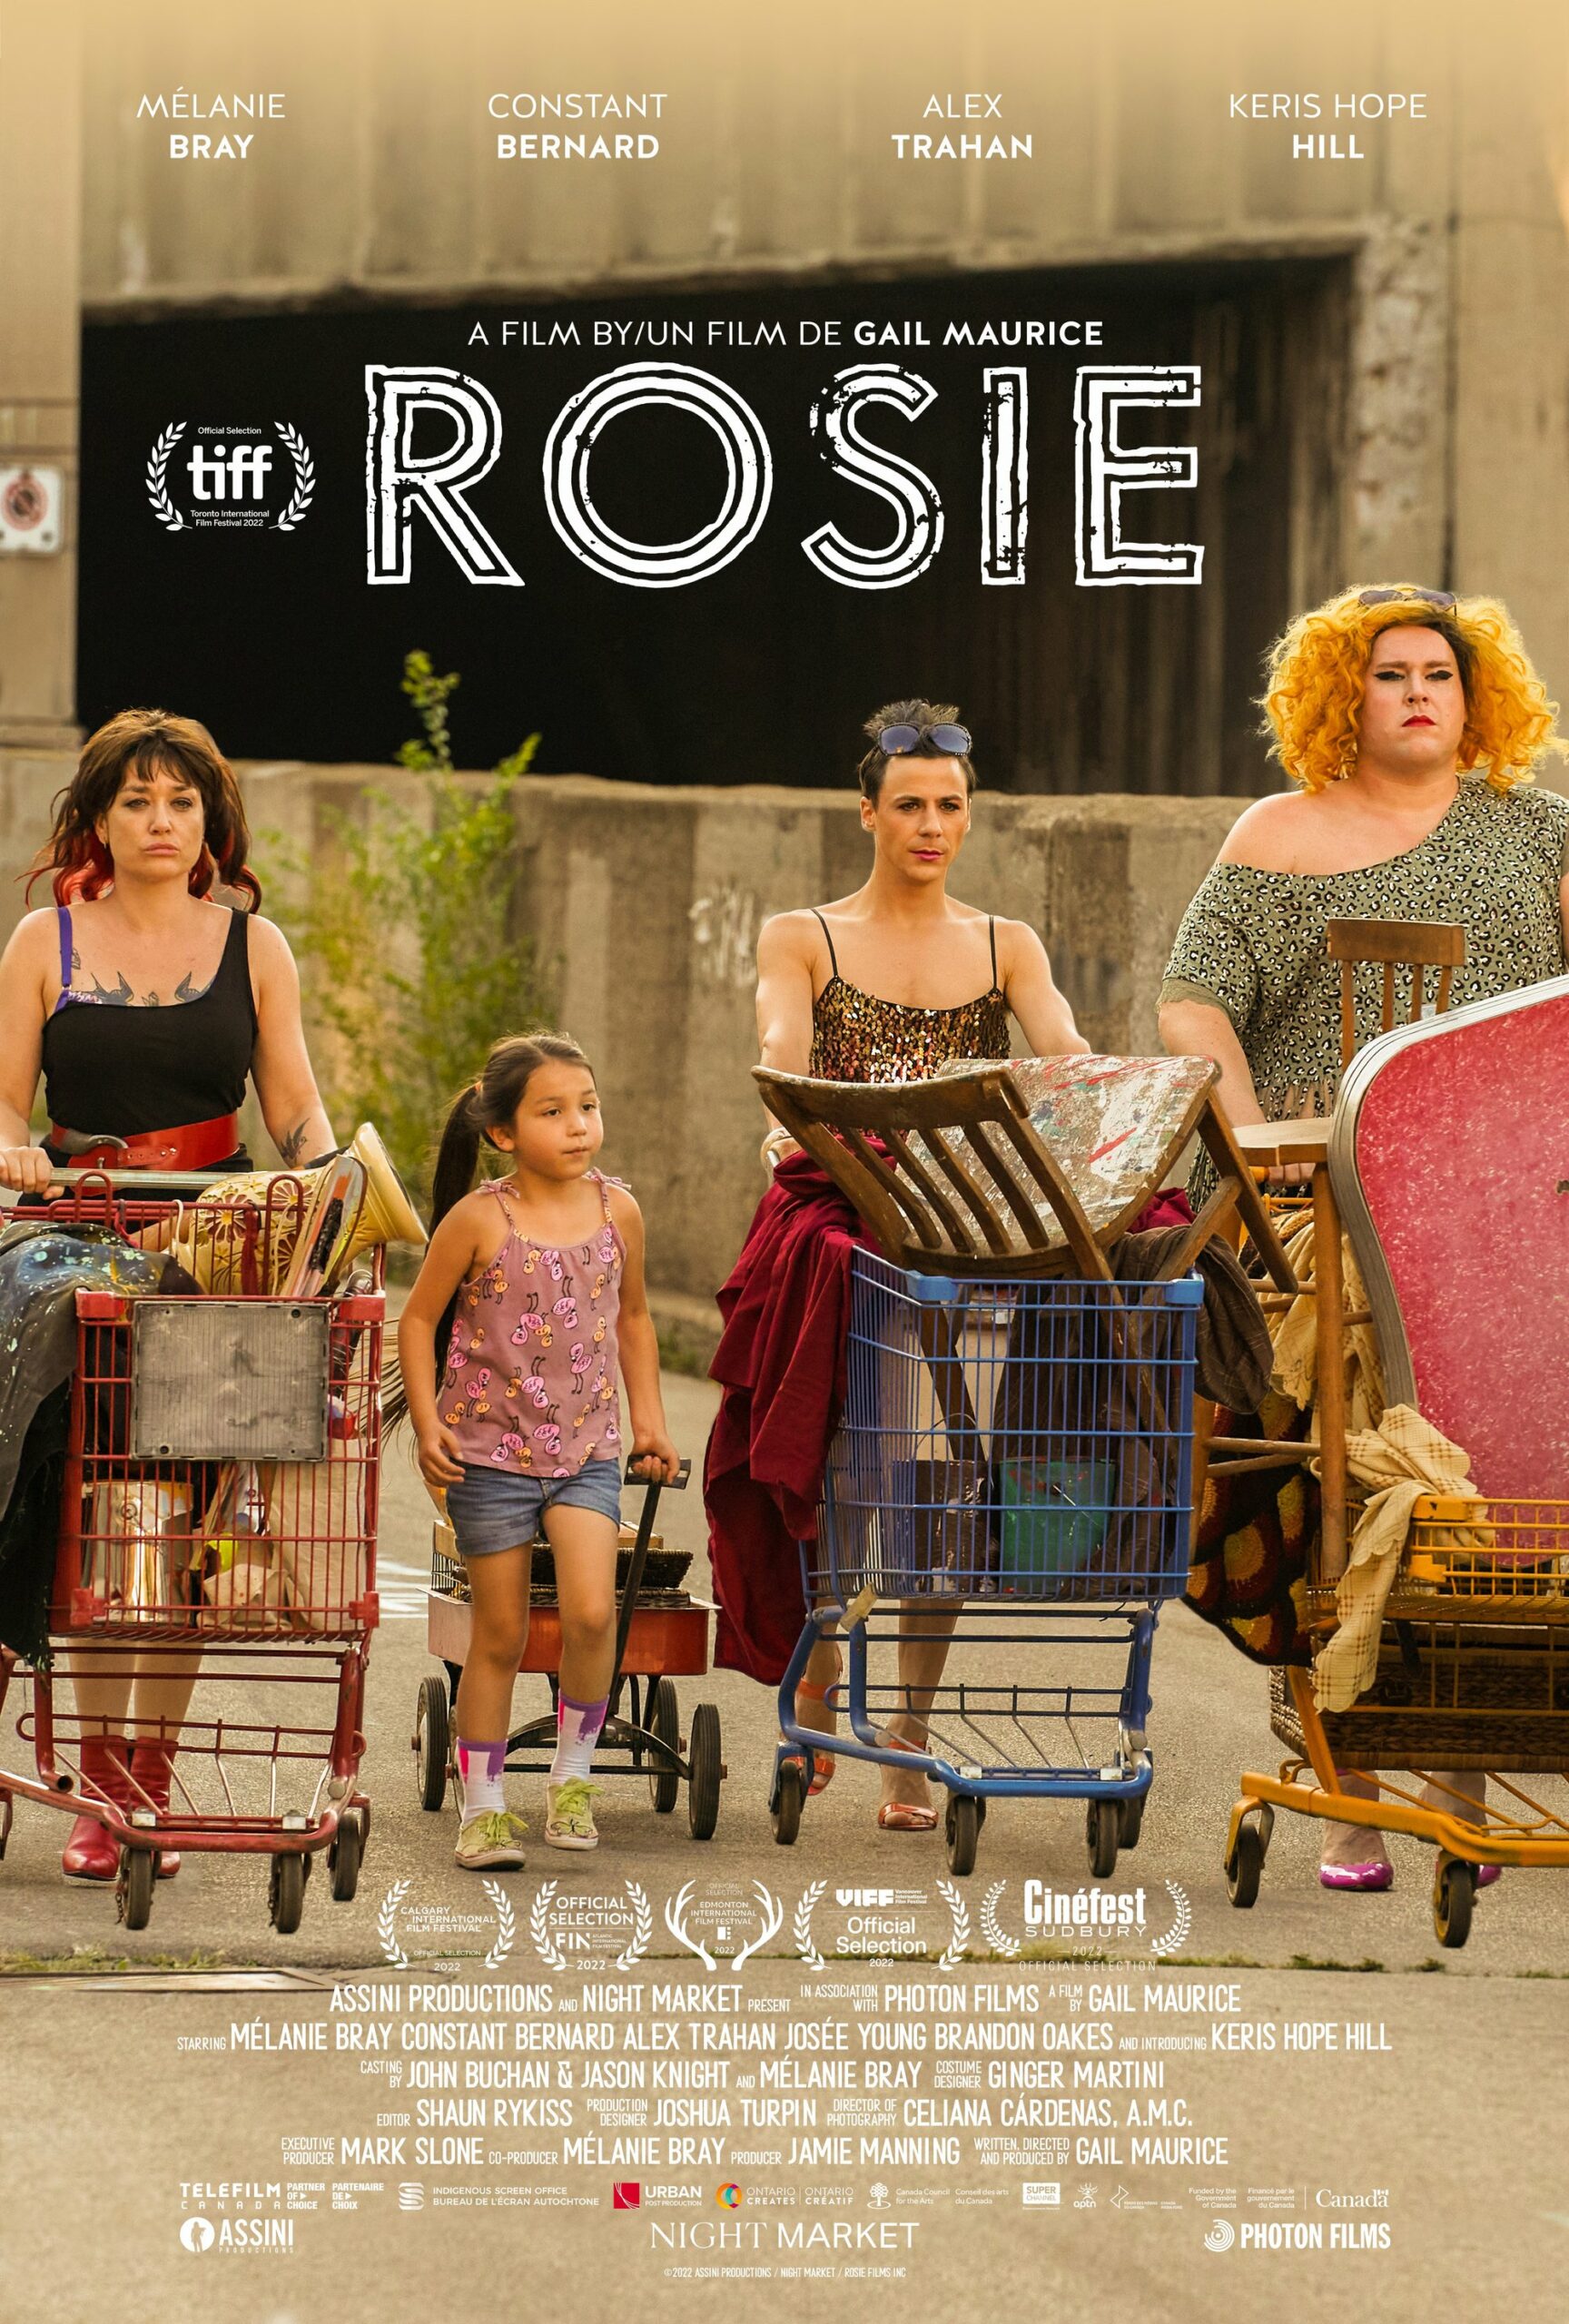 Four figures, three adults and one child, walk down a street pushing grocery carts, with the word ROSIE on a sign behind them.